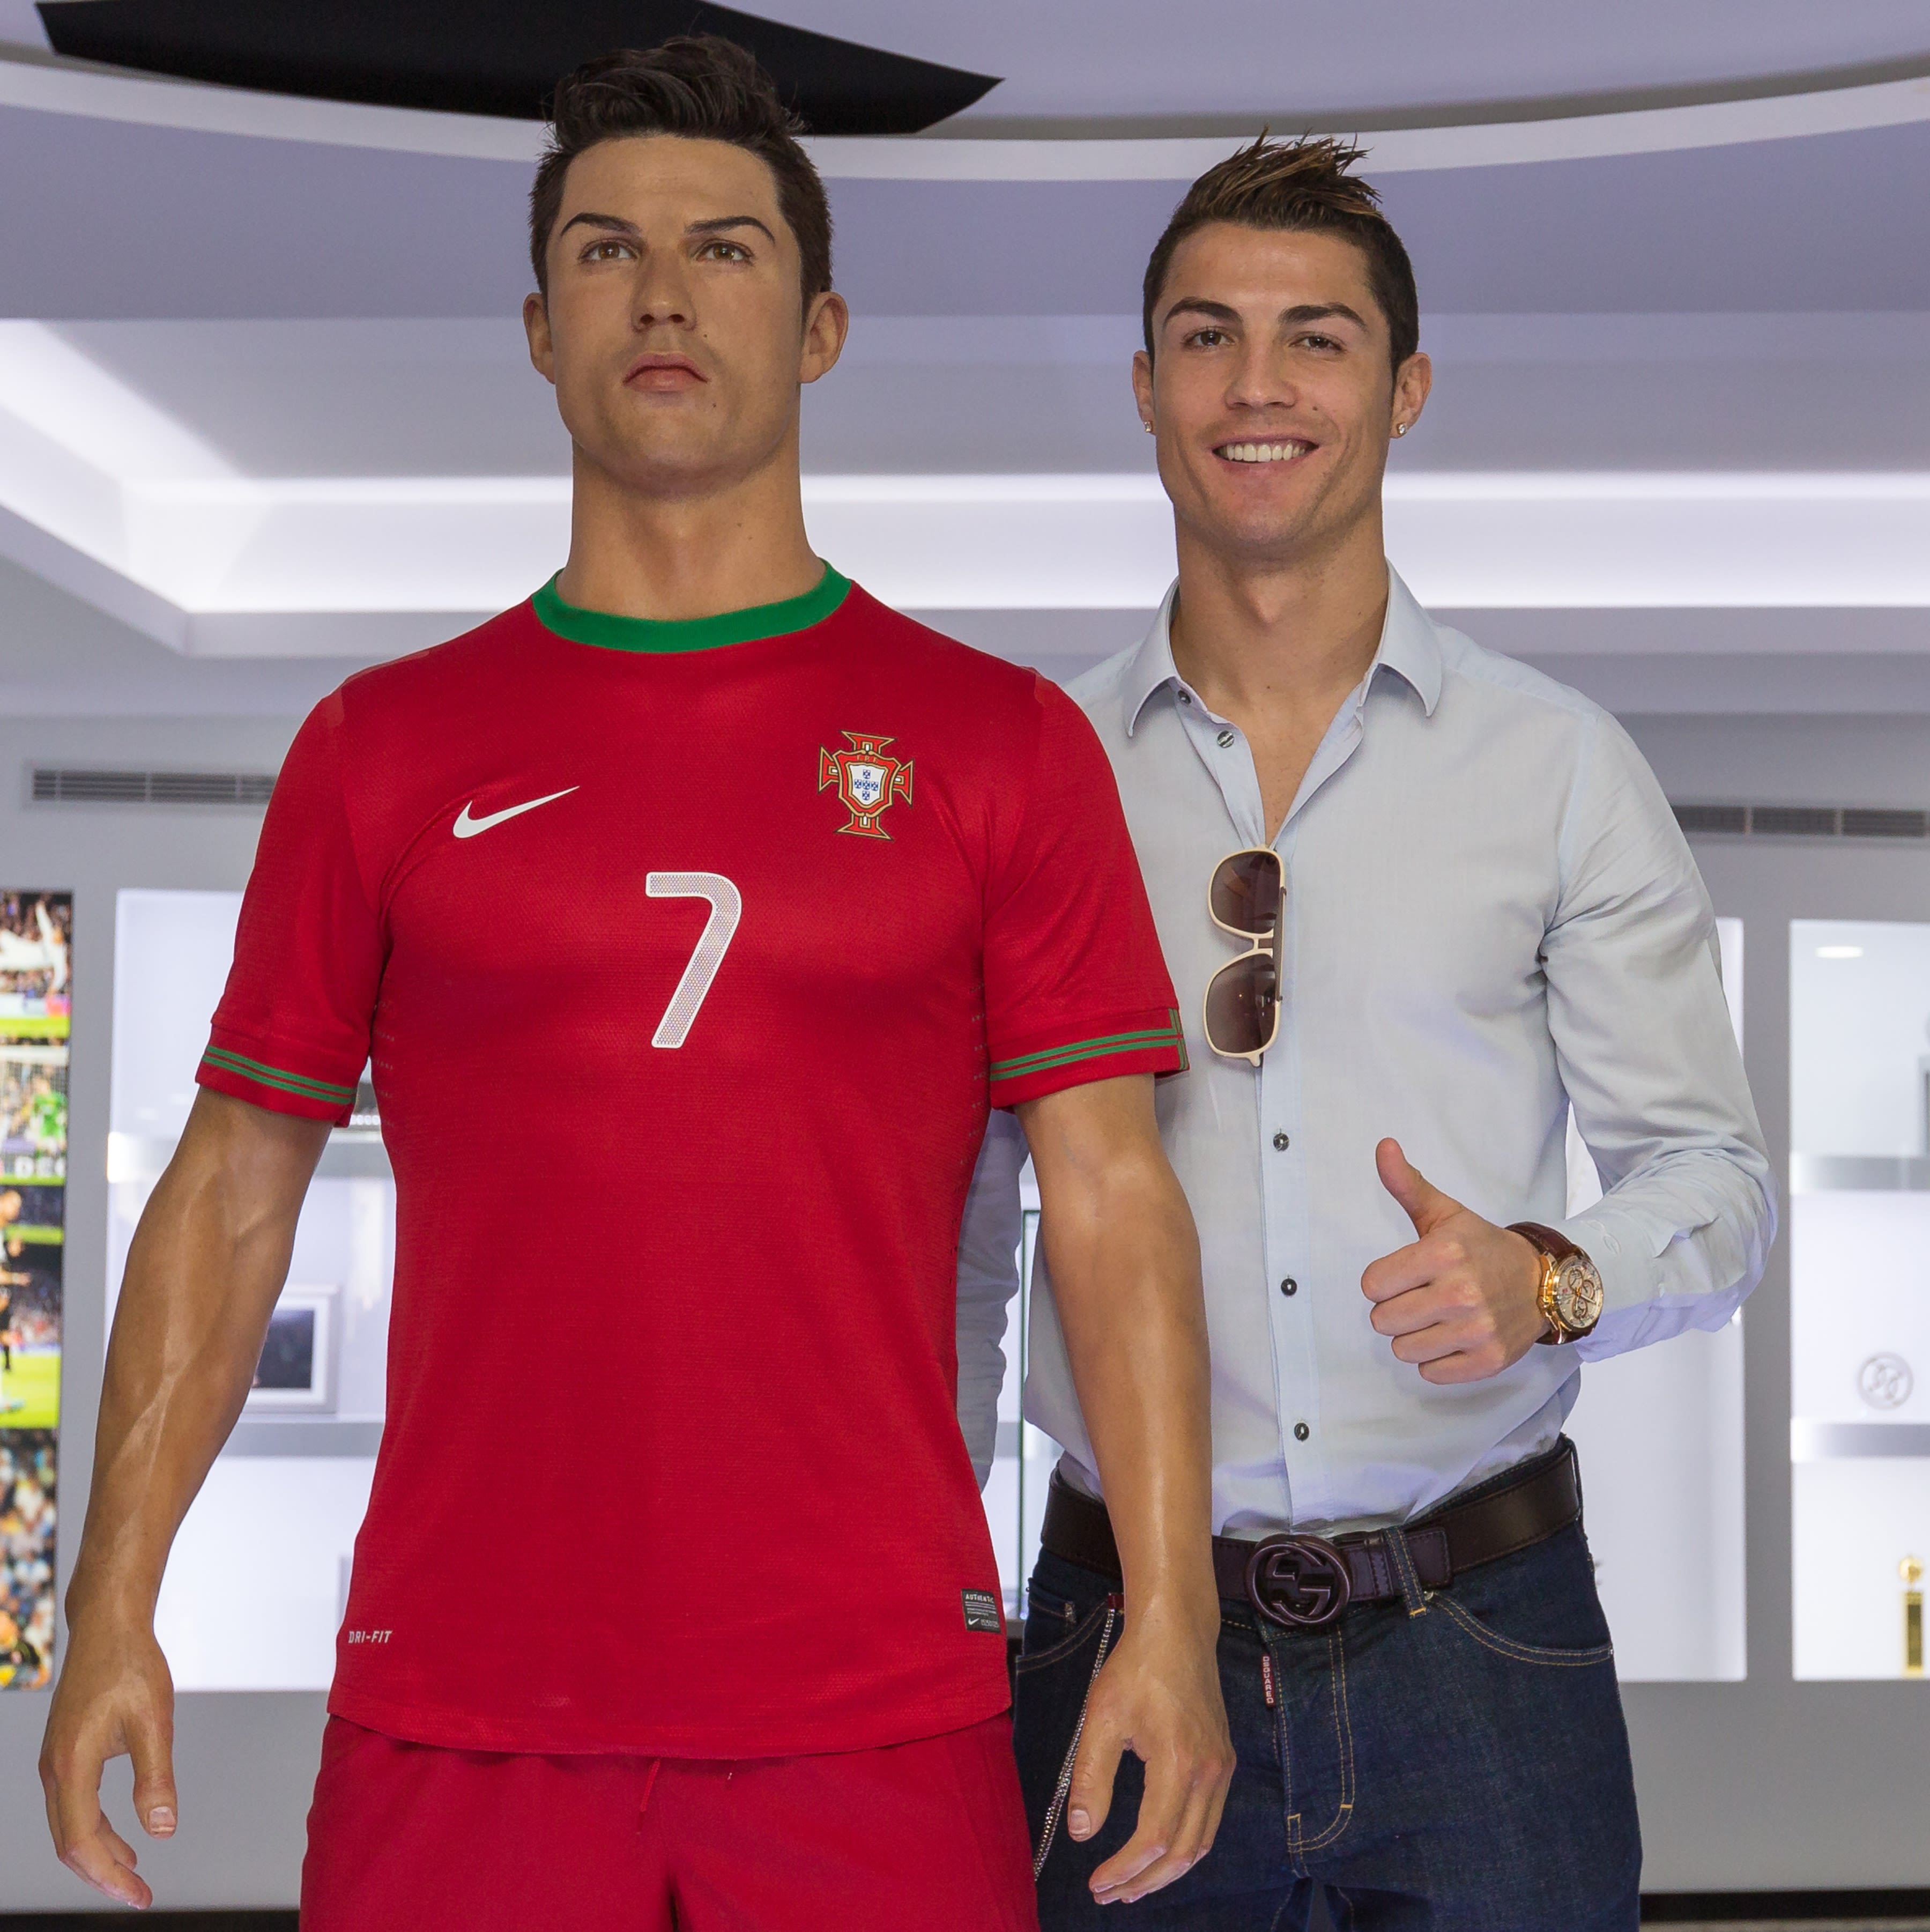 Cristiano Ronaldo Clothes and Outfits  Star Style Man – Celebrity men's  fashion